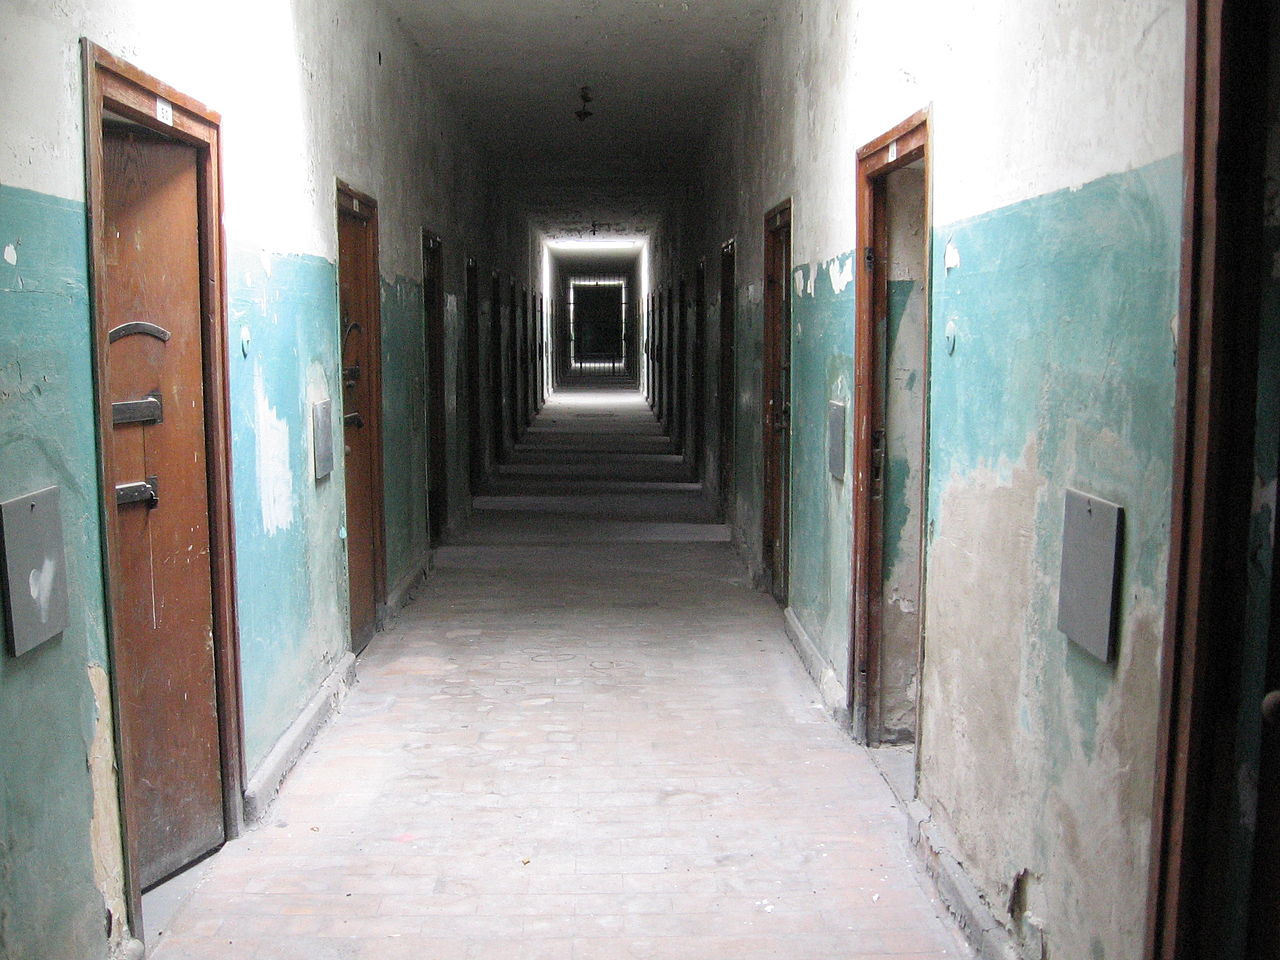 Hallway of the "Bunker" at the concentration camp Dachau